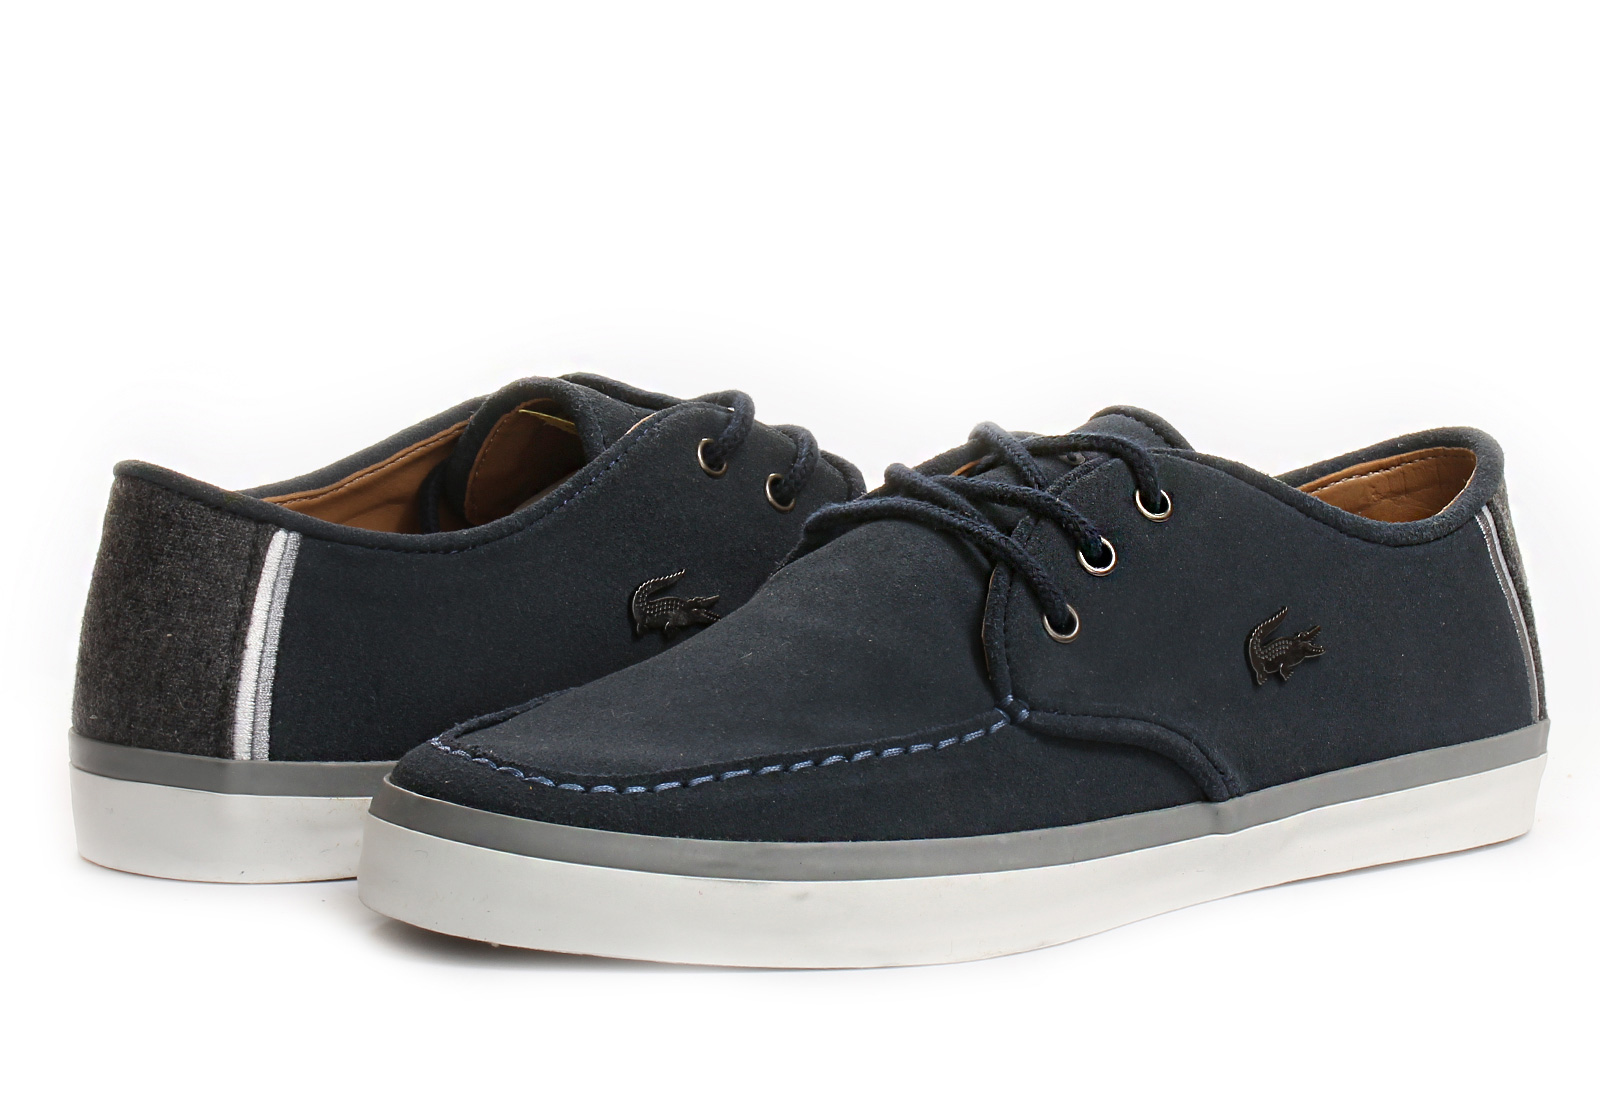 Lacoste Shoes - Sevrin - 133srm3016-125 - Online shop for sneakers ...